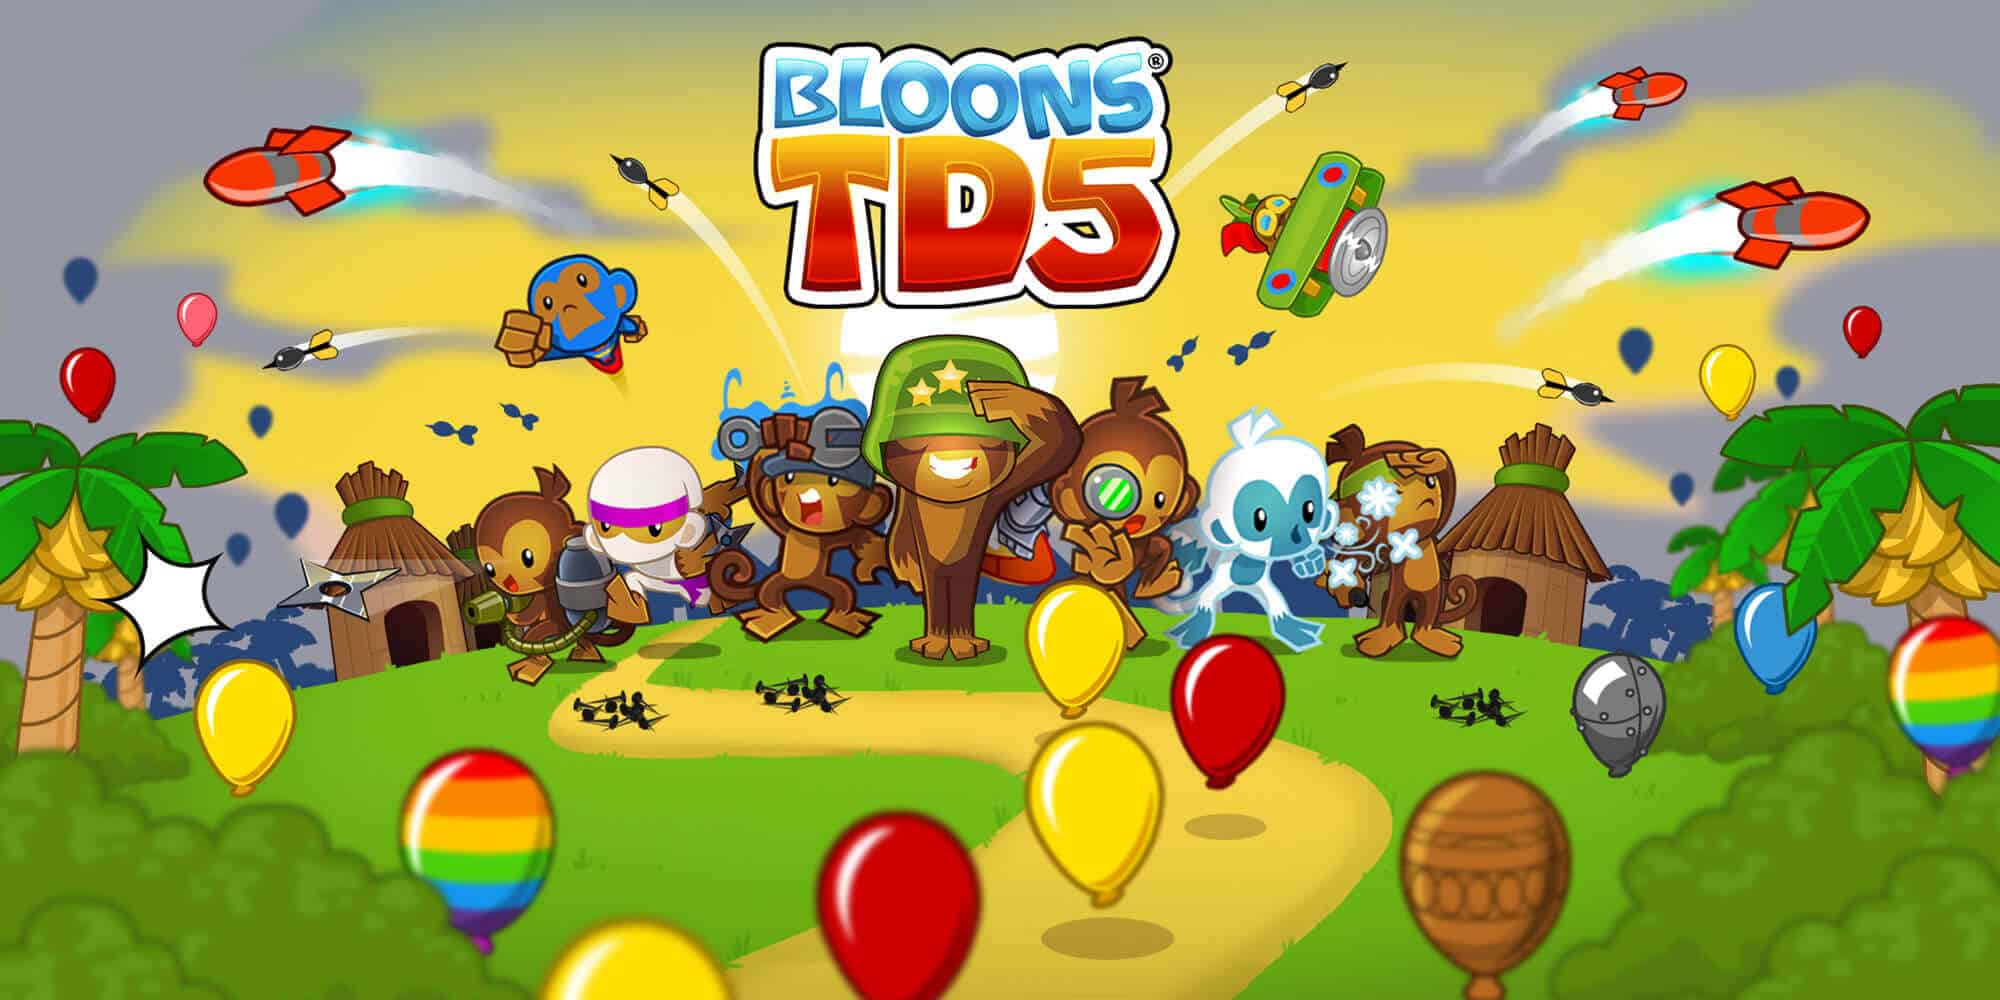 bloons td6 free download